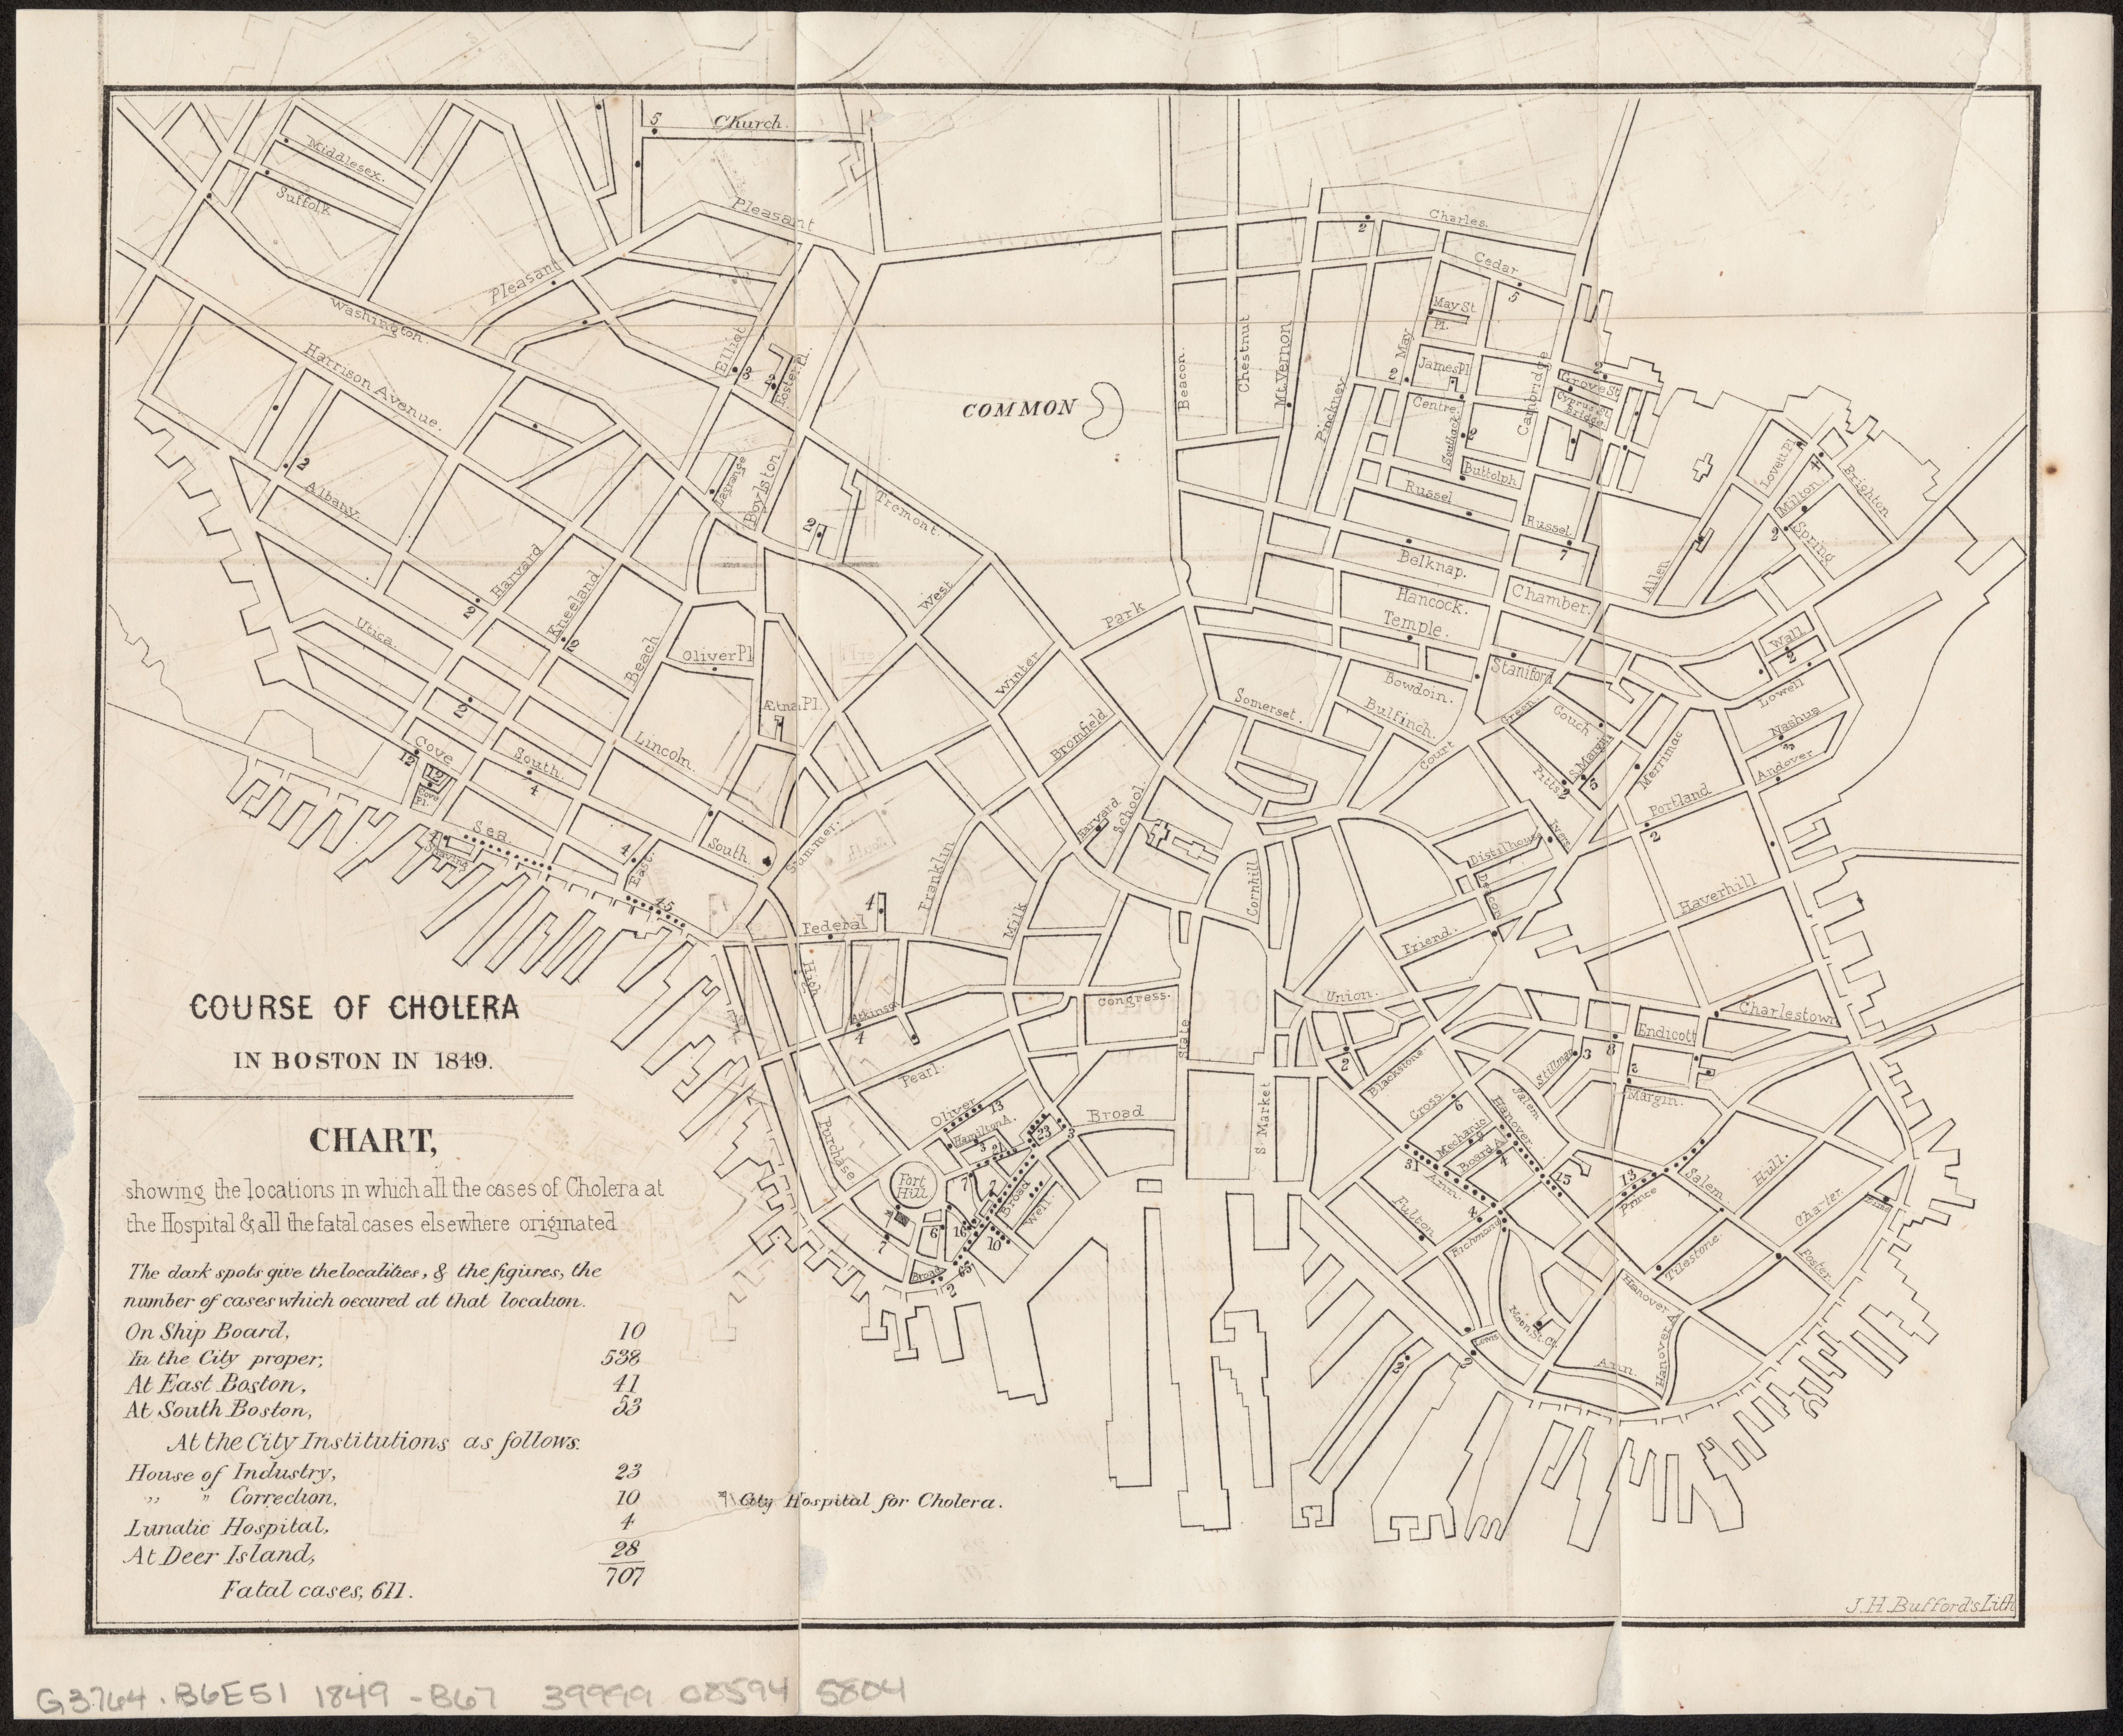 From our collections, this 1866 map depicts an 1849 cholera outbreak in Boston.